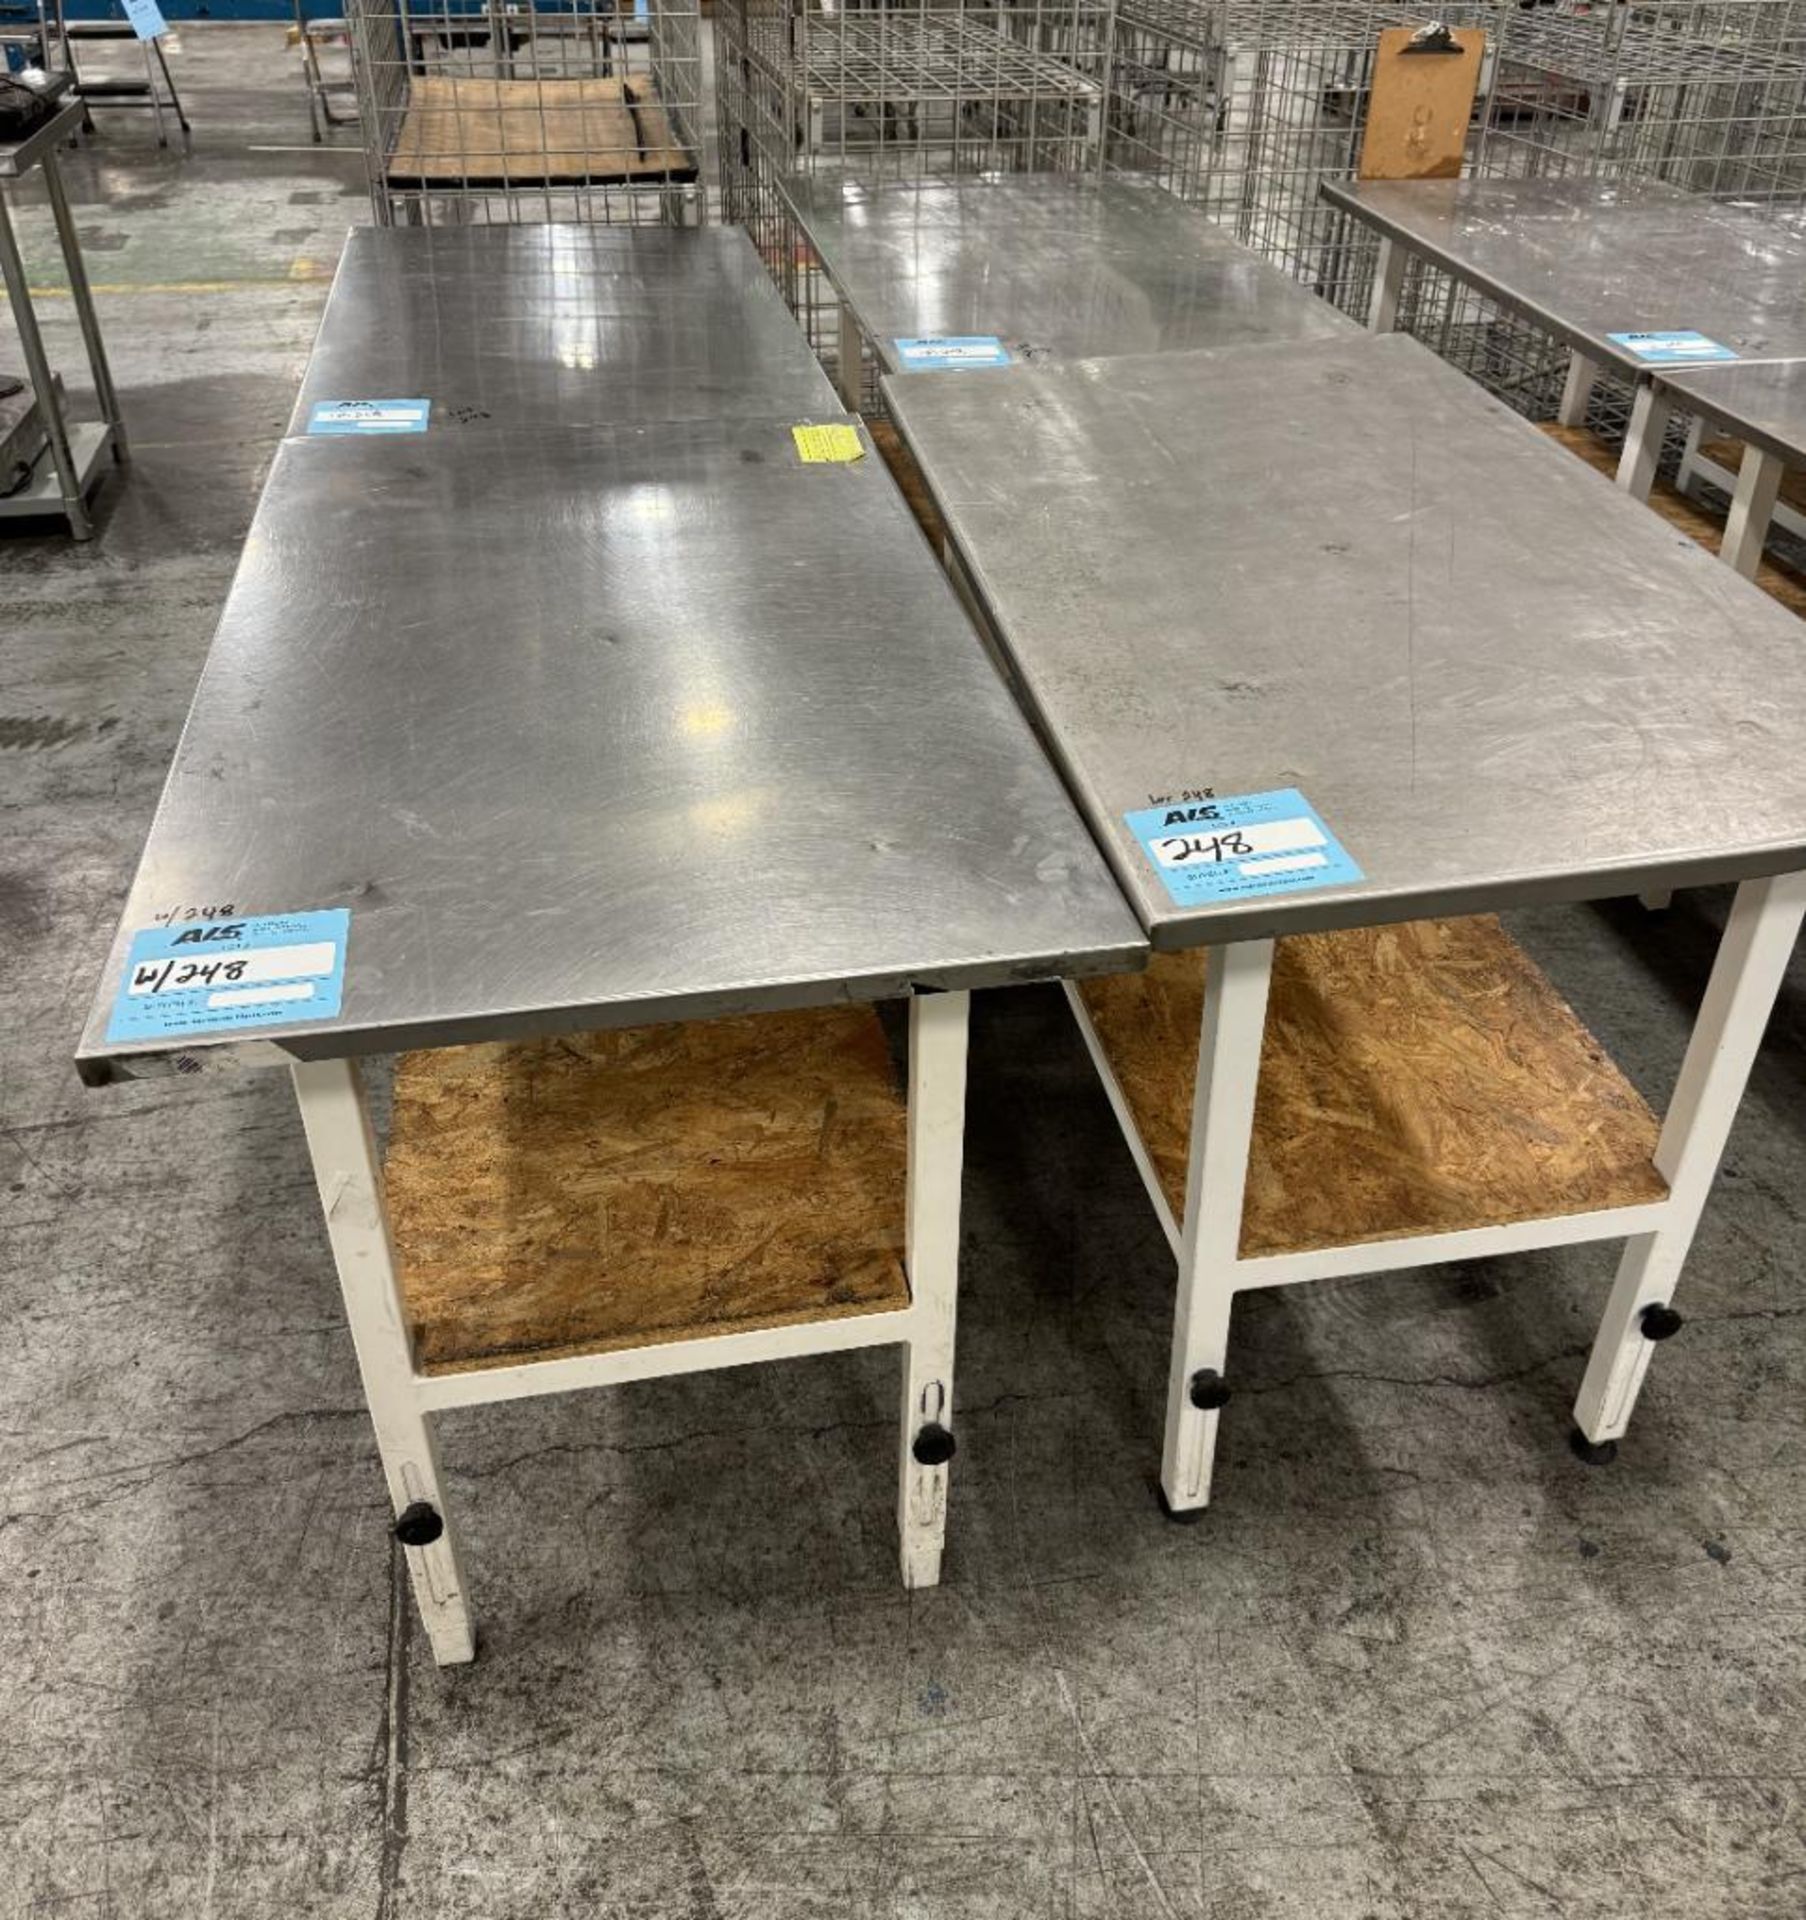 Lot Of (4) Stainless Steel Top Tables. With steel frame.